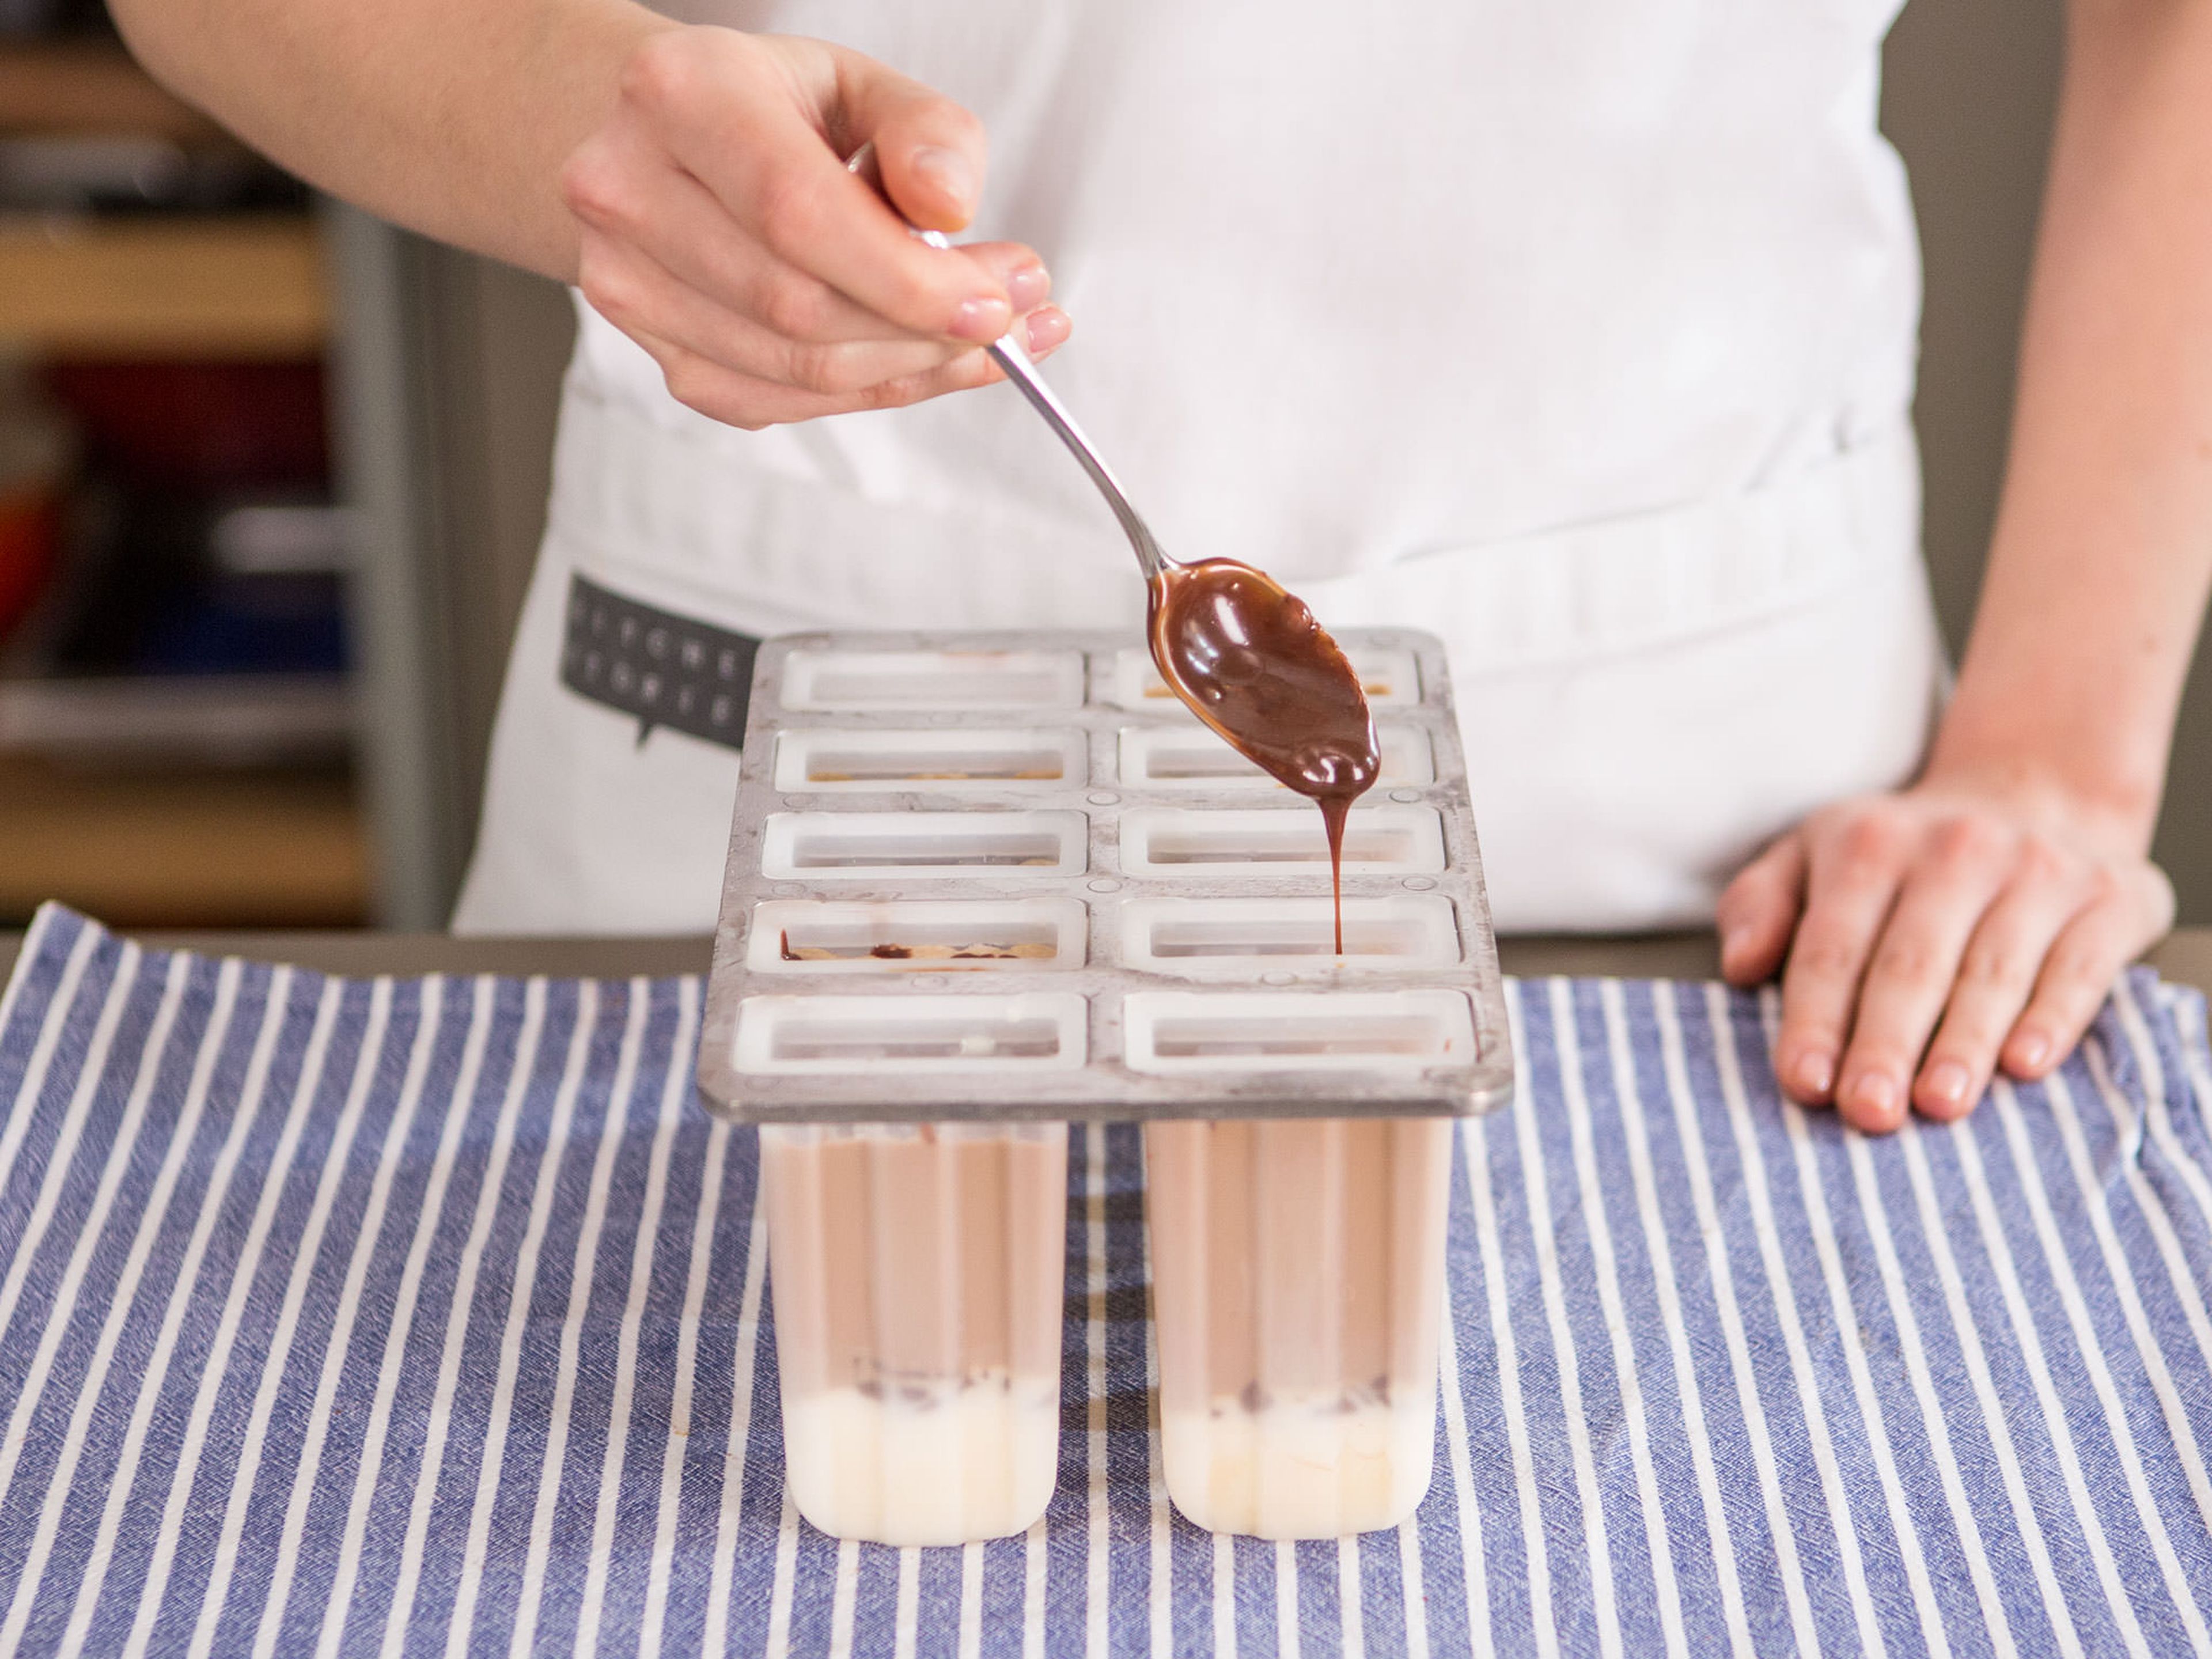 Roughly chop chocolate. Heat remainder of cream in a small saucepan over low heat, add chocolate, and stir until melted. Now, add chocolate to each popsicle mold. Close your popsicle mold and insert popsicle sticks. Place in freezer for approx. 4 – 6 h.